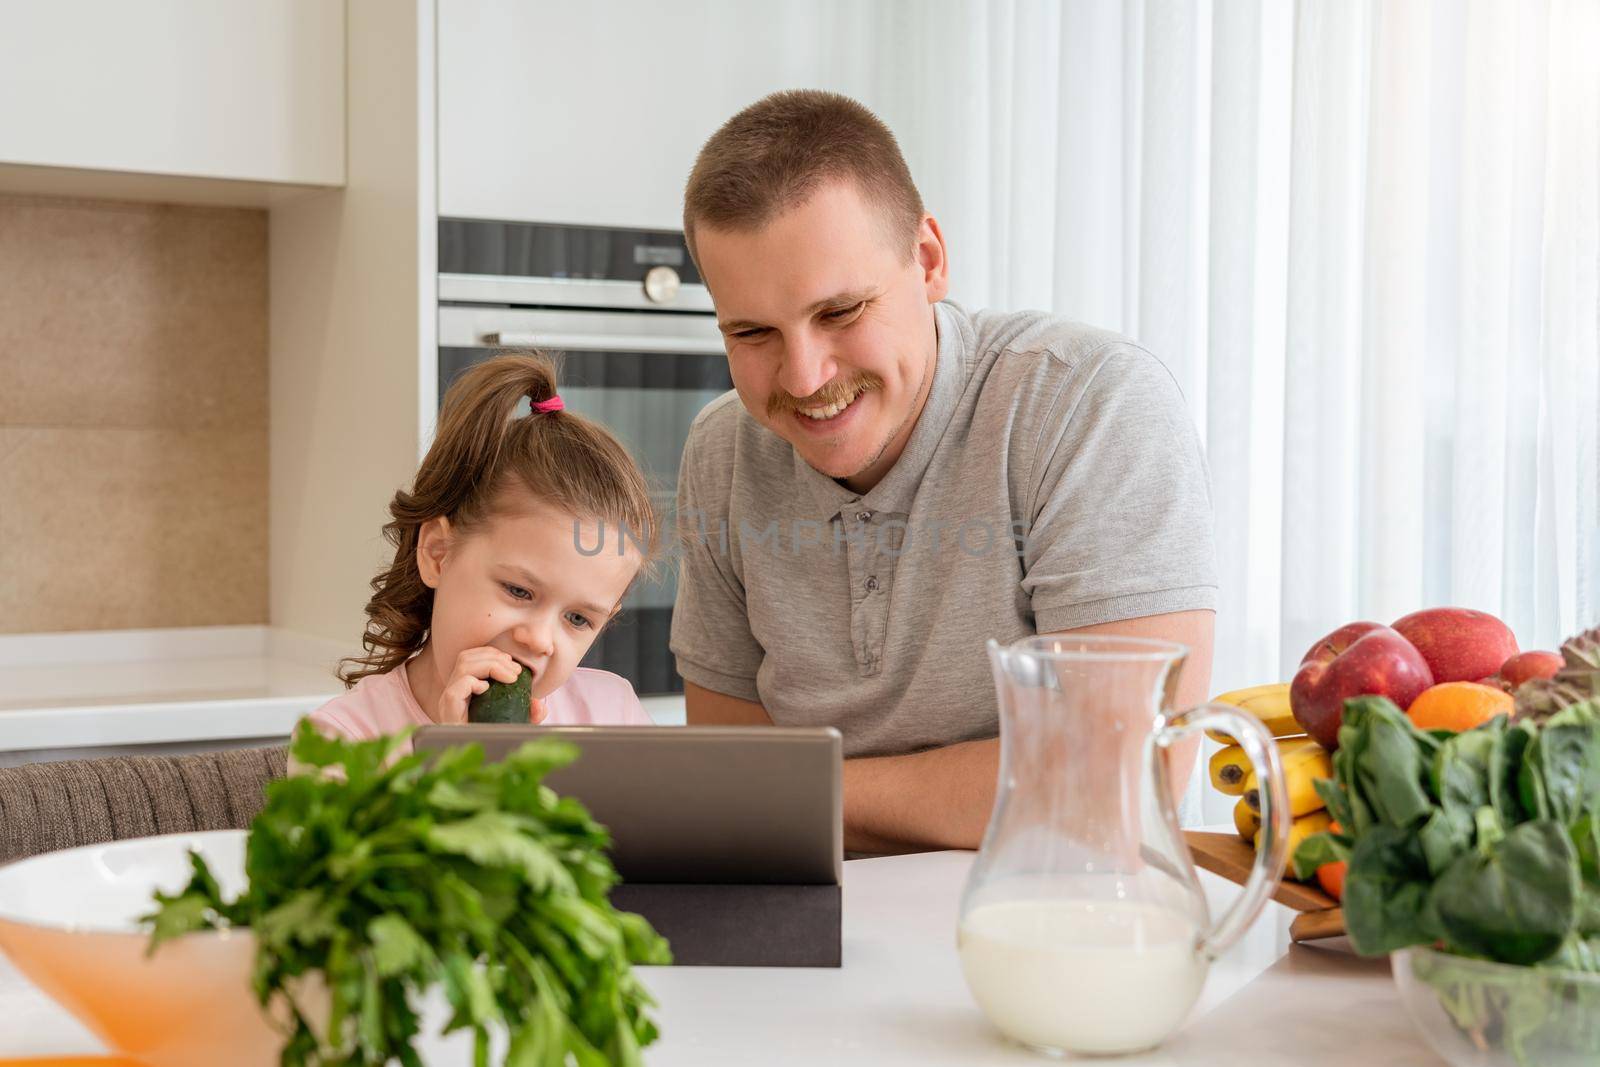 Father And Daughter Using Digital Tablet In Kitchen At Home by Mariakray